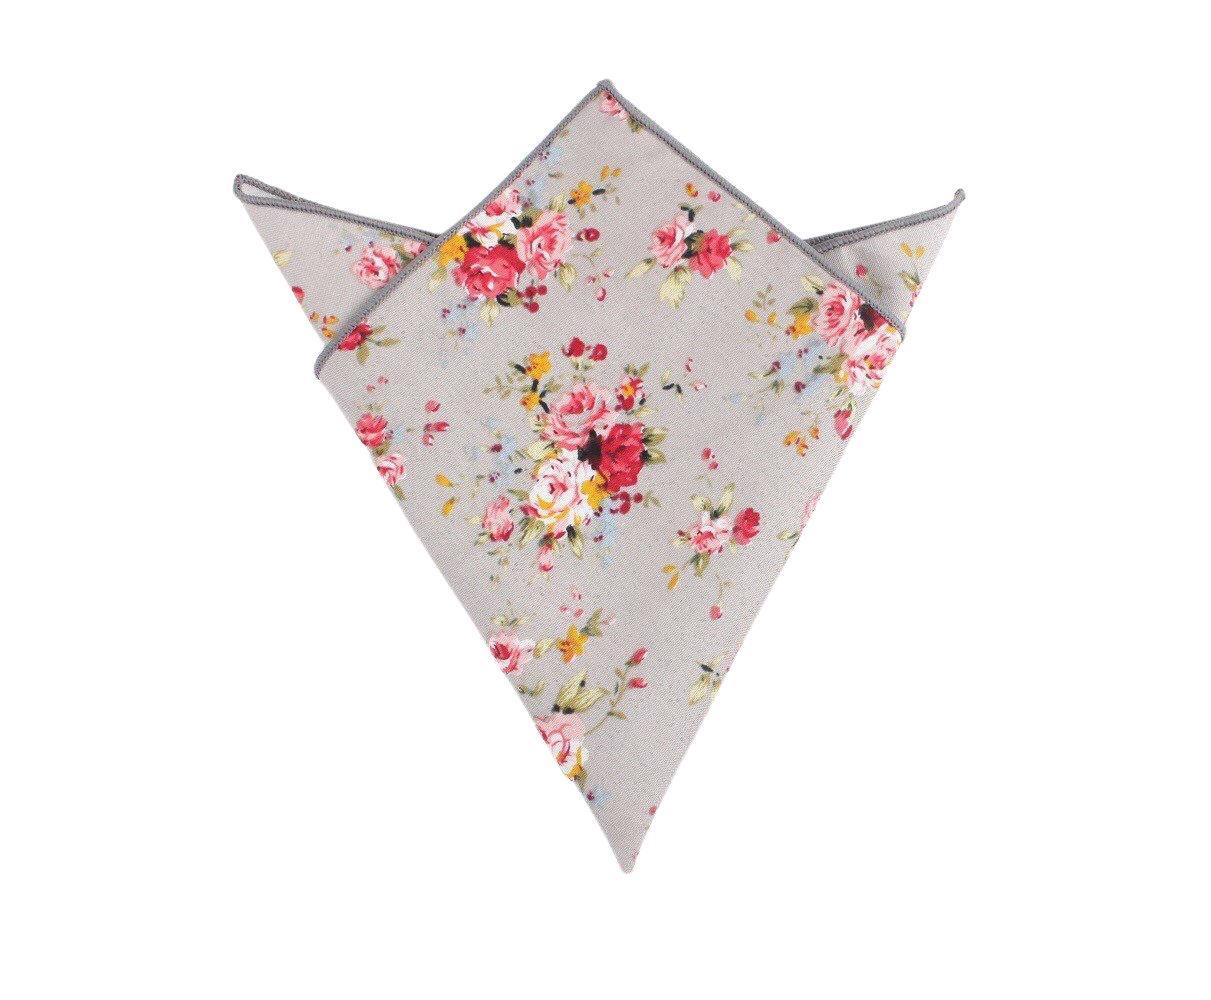 Gray Floral Pocket Square RAIN Mytieshop Material CottonItem Length: 23 cm ( 9 inches)Item Width : 22 cm (8.6 inches) A dashing addition to your formalwear. A modern and stylish take on the traditional pocket square, this RAIN design is perfect for injecting a touch of elegance to any outfit. With a sleek gray background and floral pattern, it&#39;ll make any suit stand out. With its versatile style, this pocket square is perfect for any formal event. Whether you&#39;re attending a wedding or simply dre